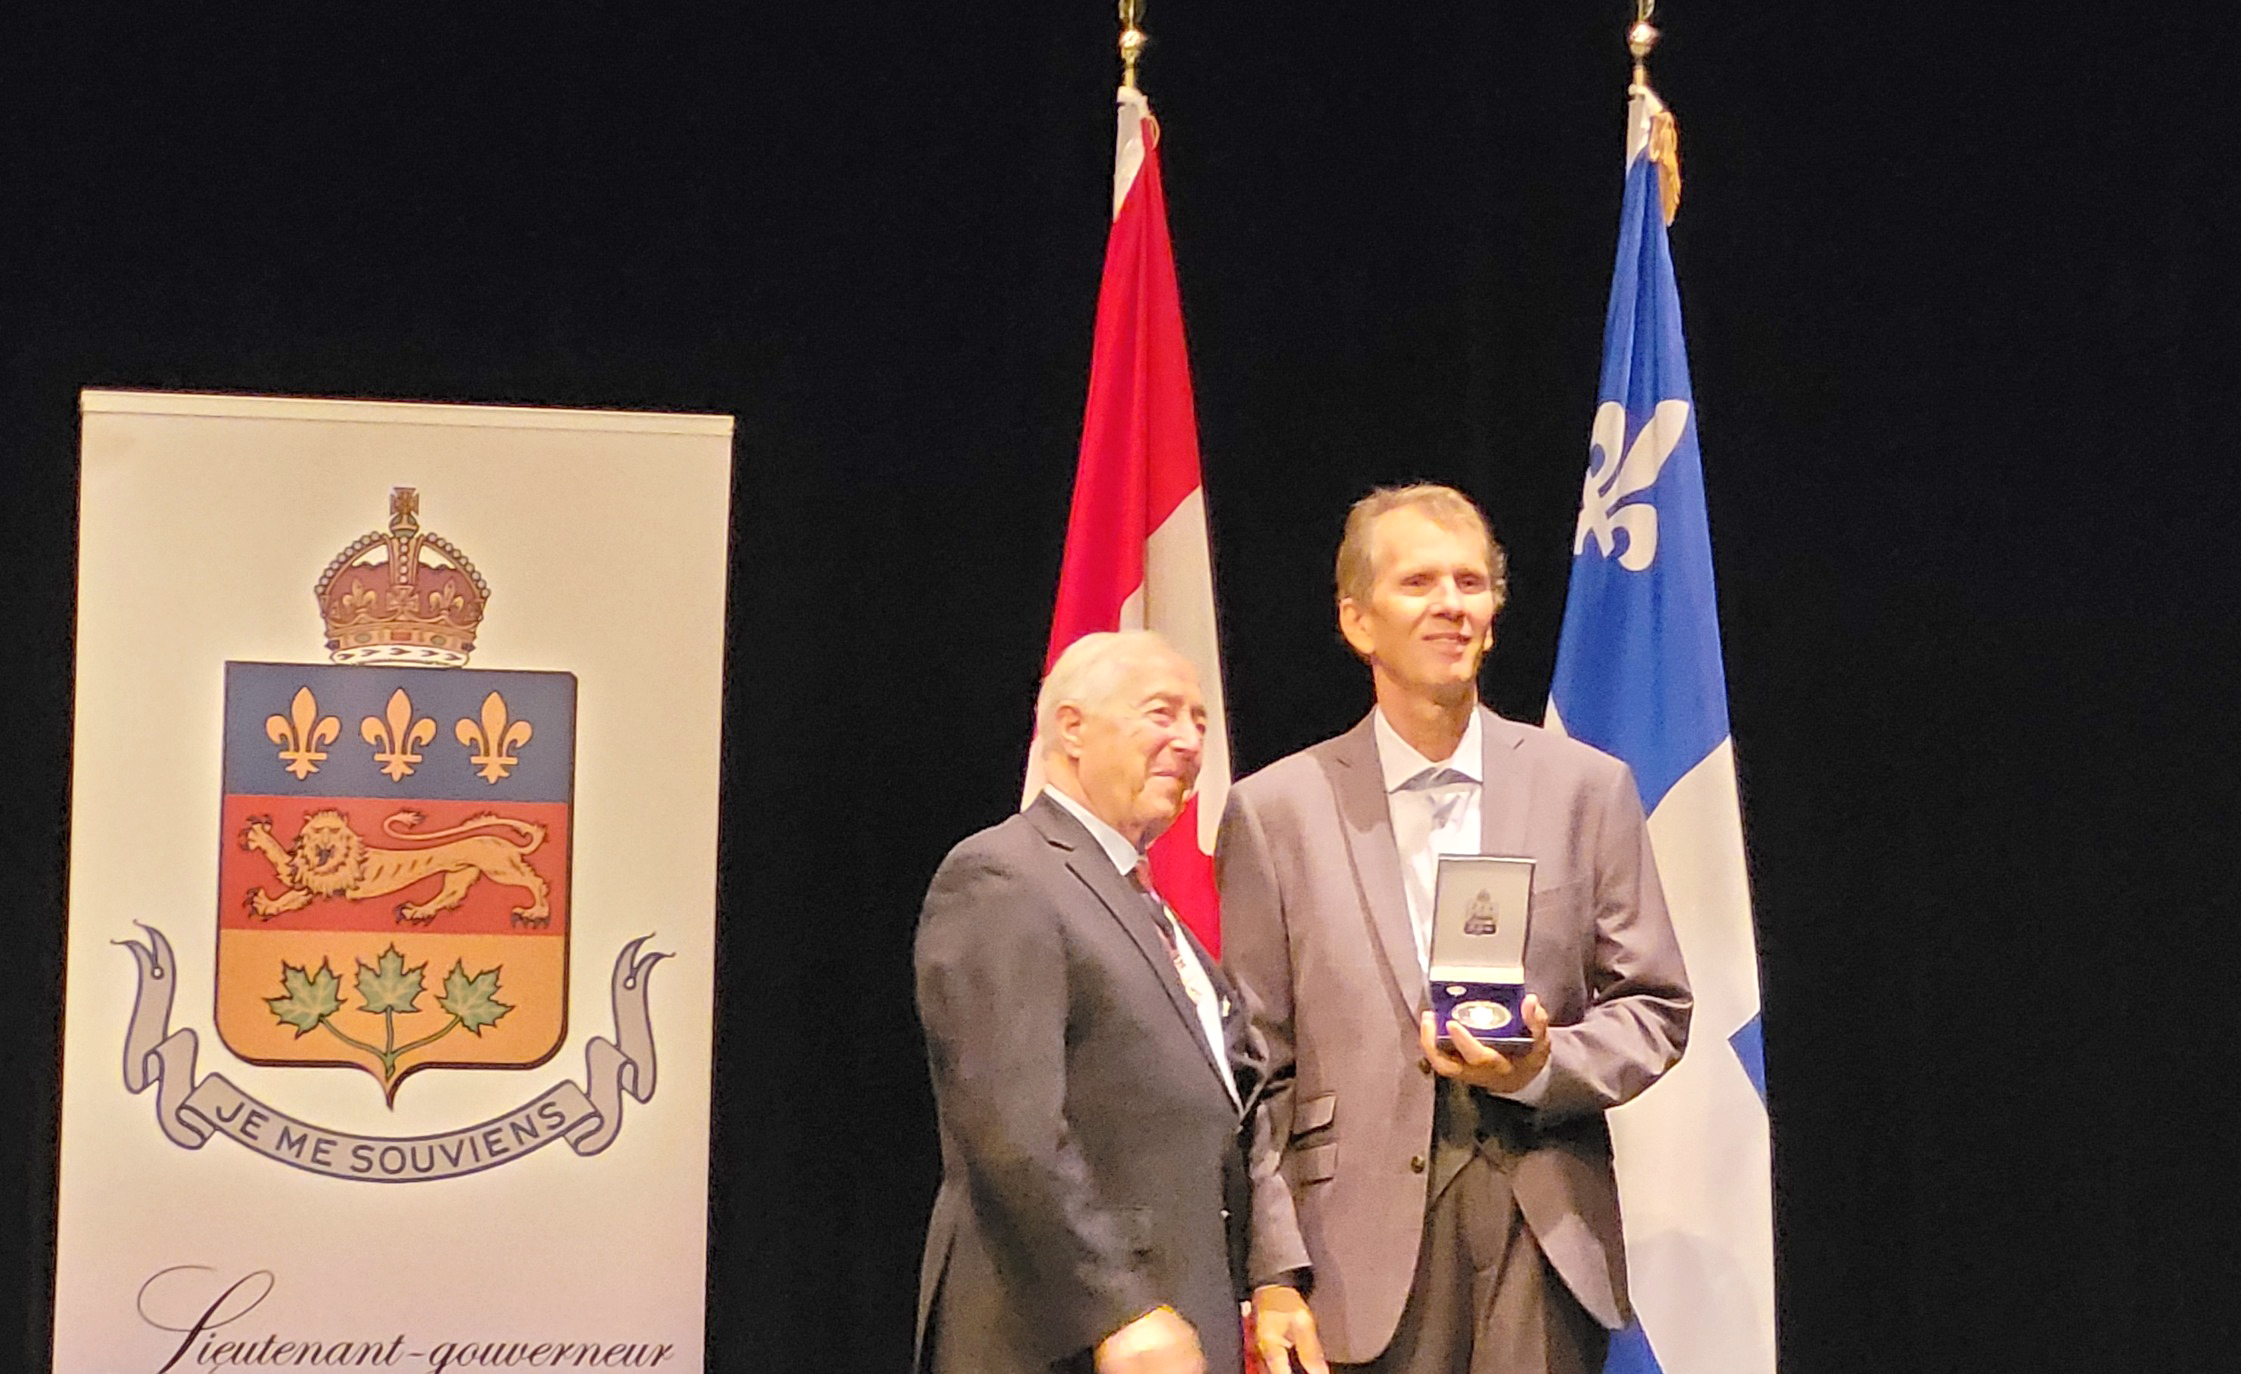 The Medal of the Governor of Quebec, awarded to our countryman, Nicolae Mărgineanu